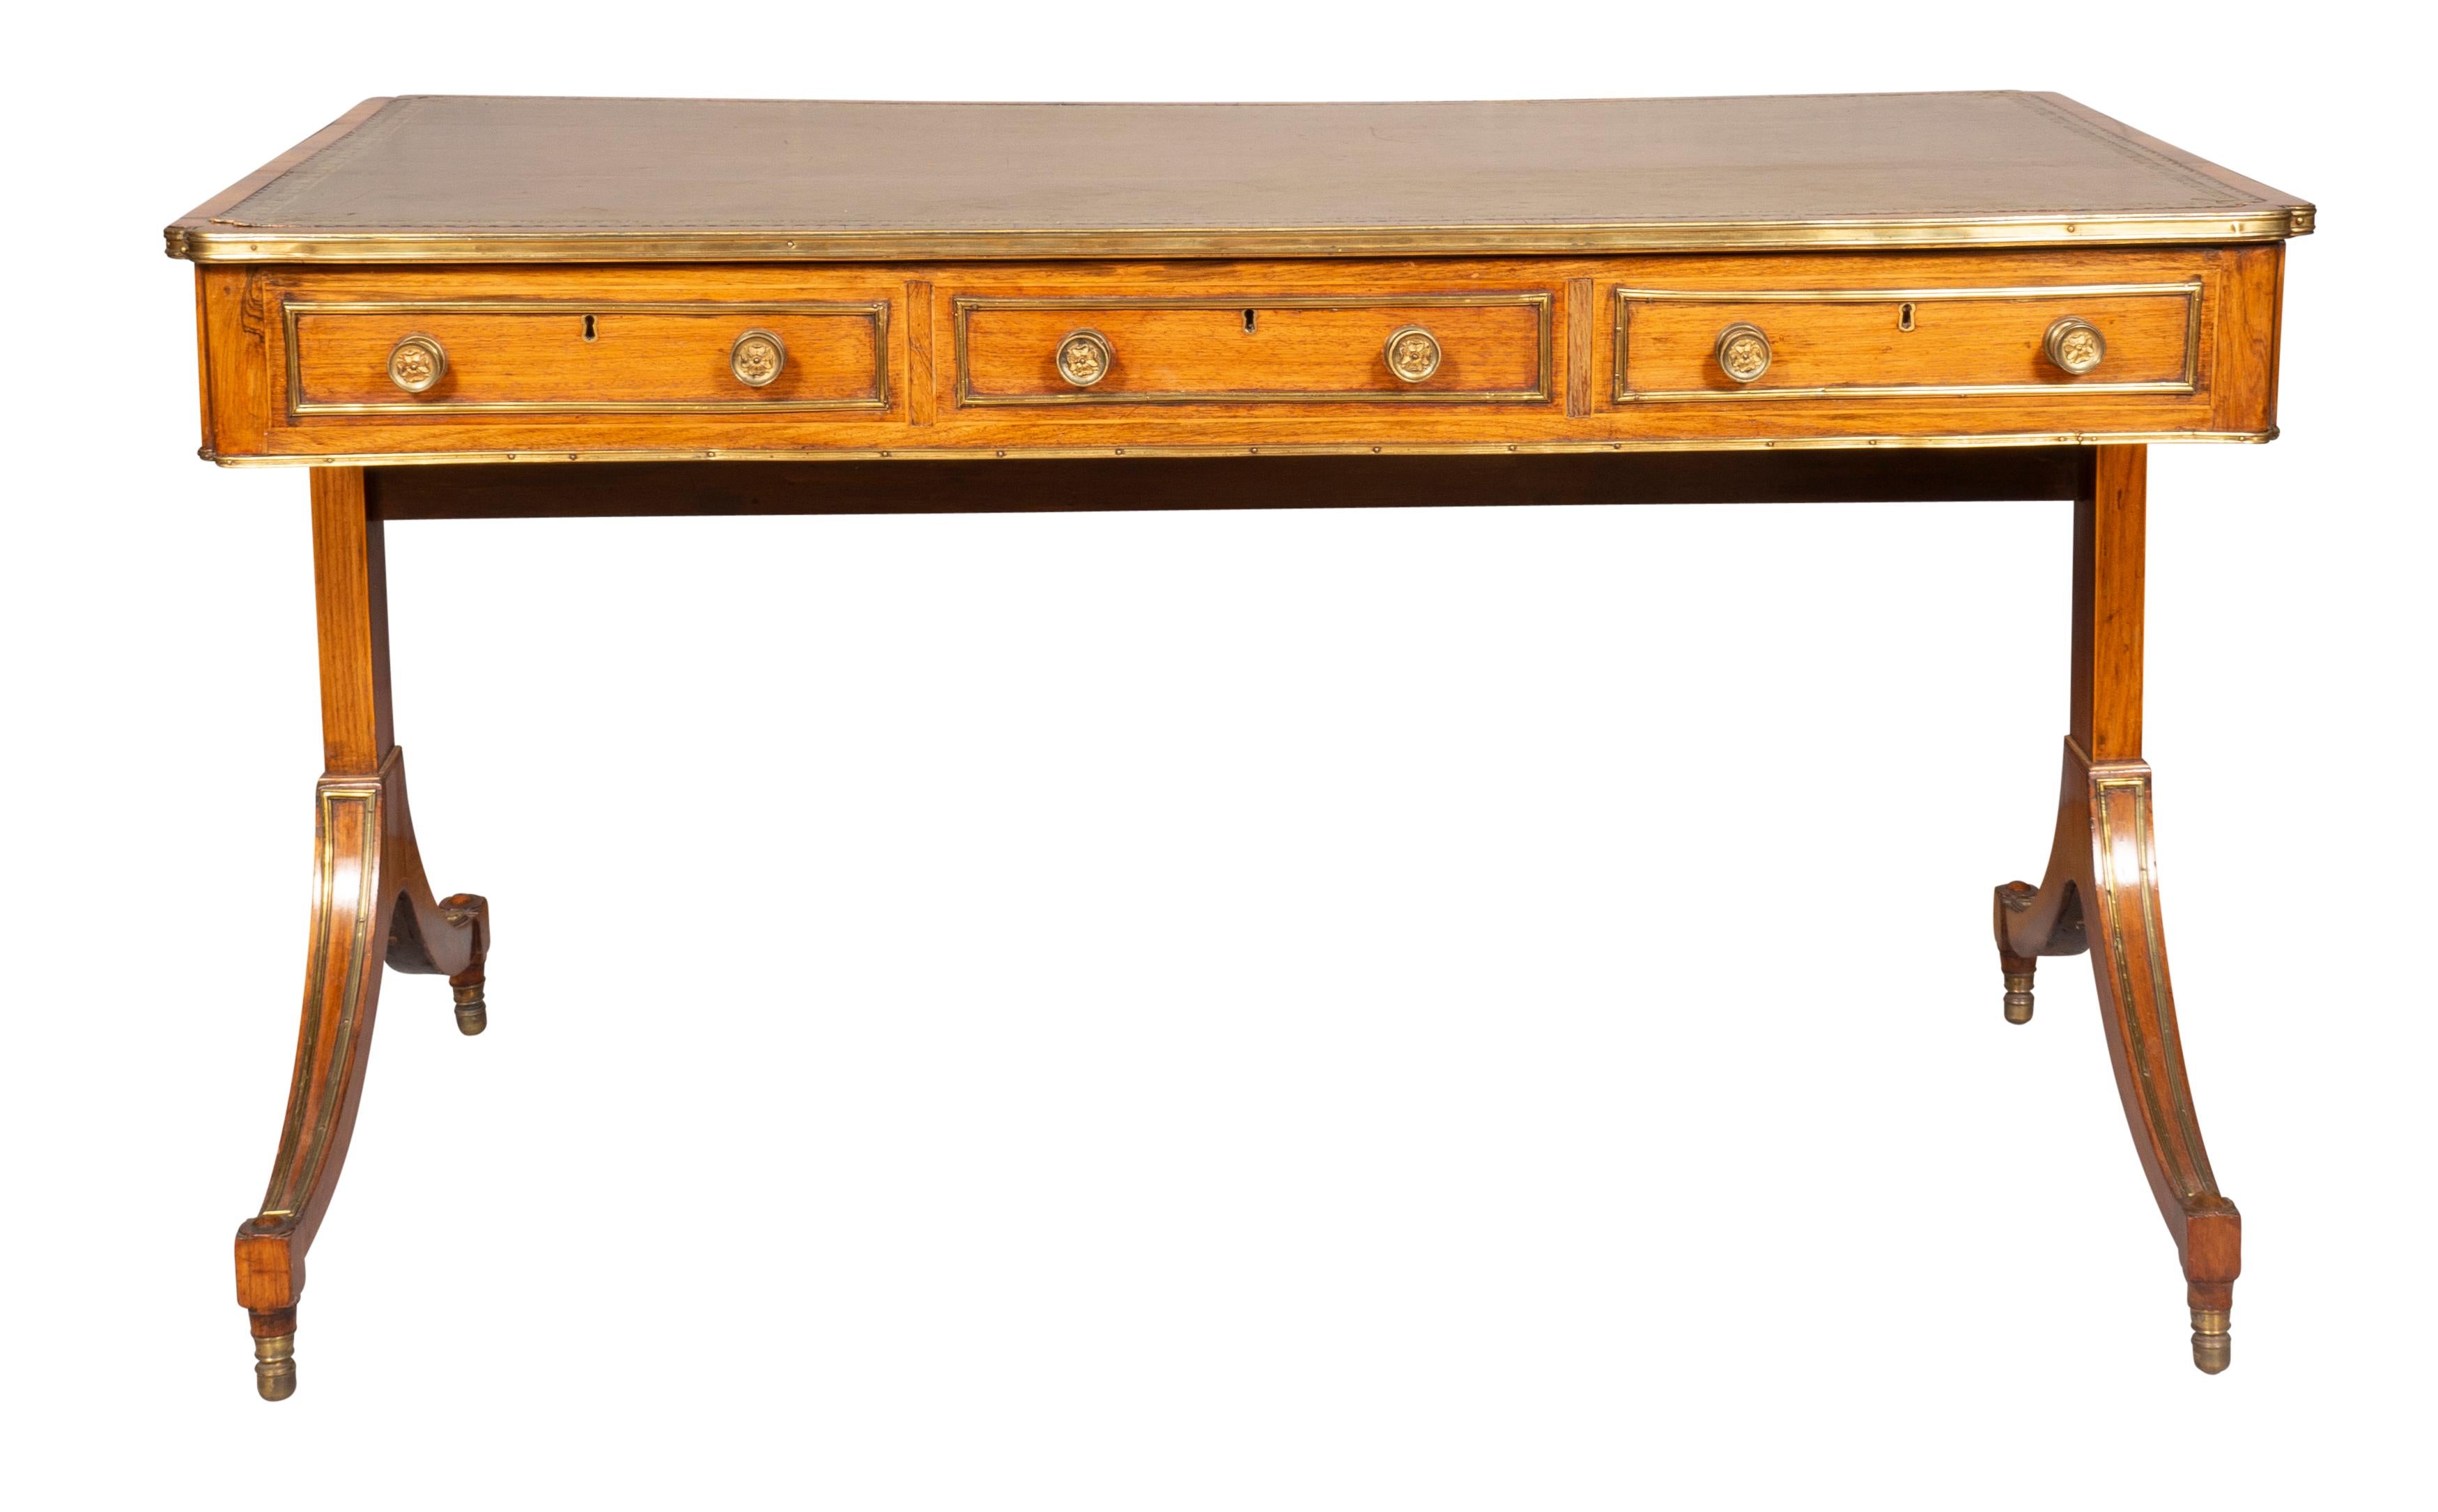 Early 19th Century Regency Rosewood and Brass Mounted Writing Table